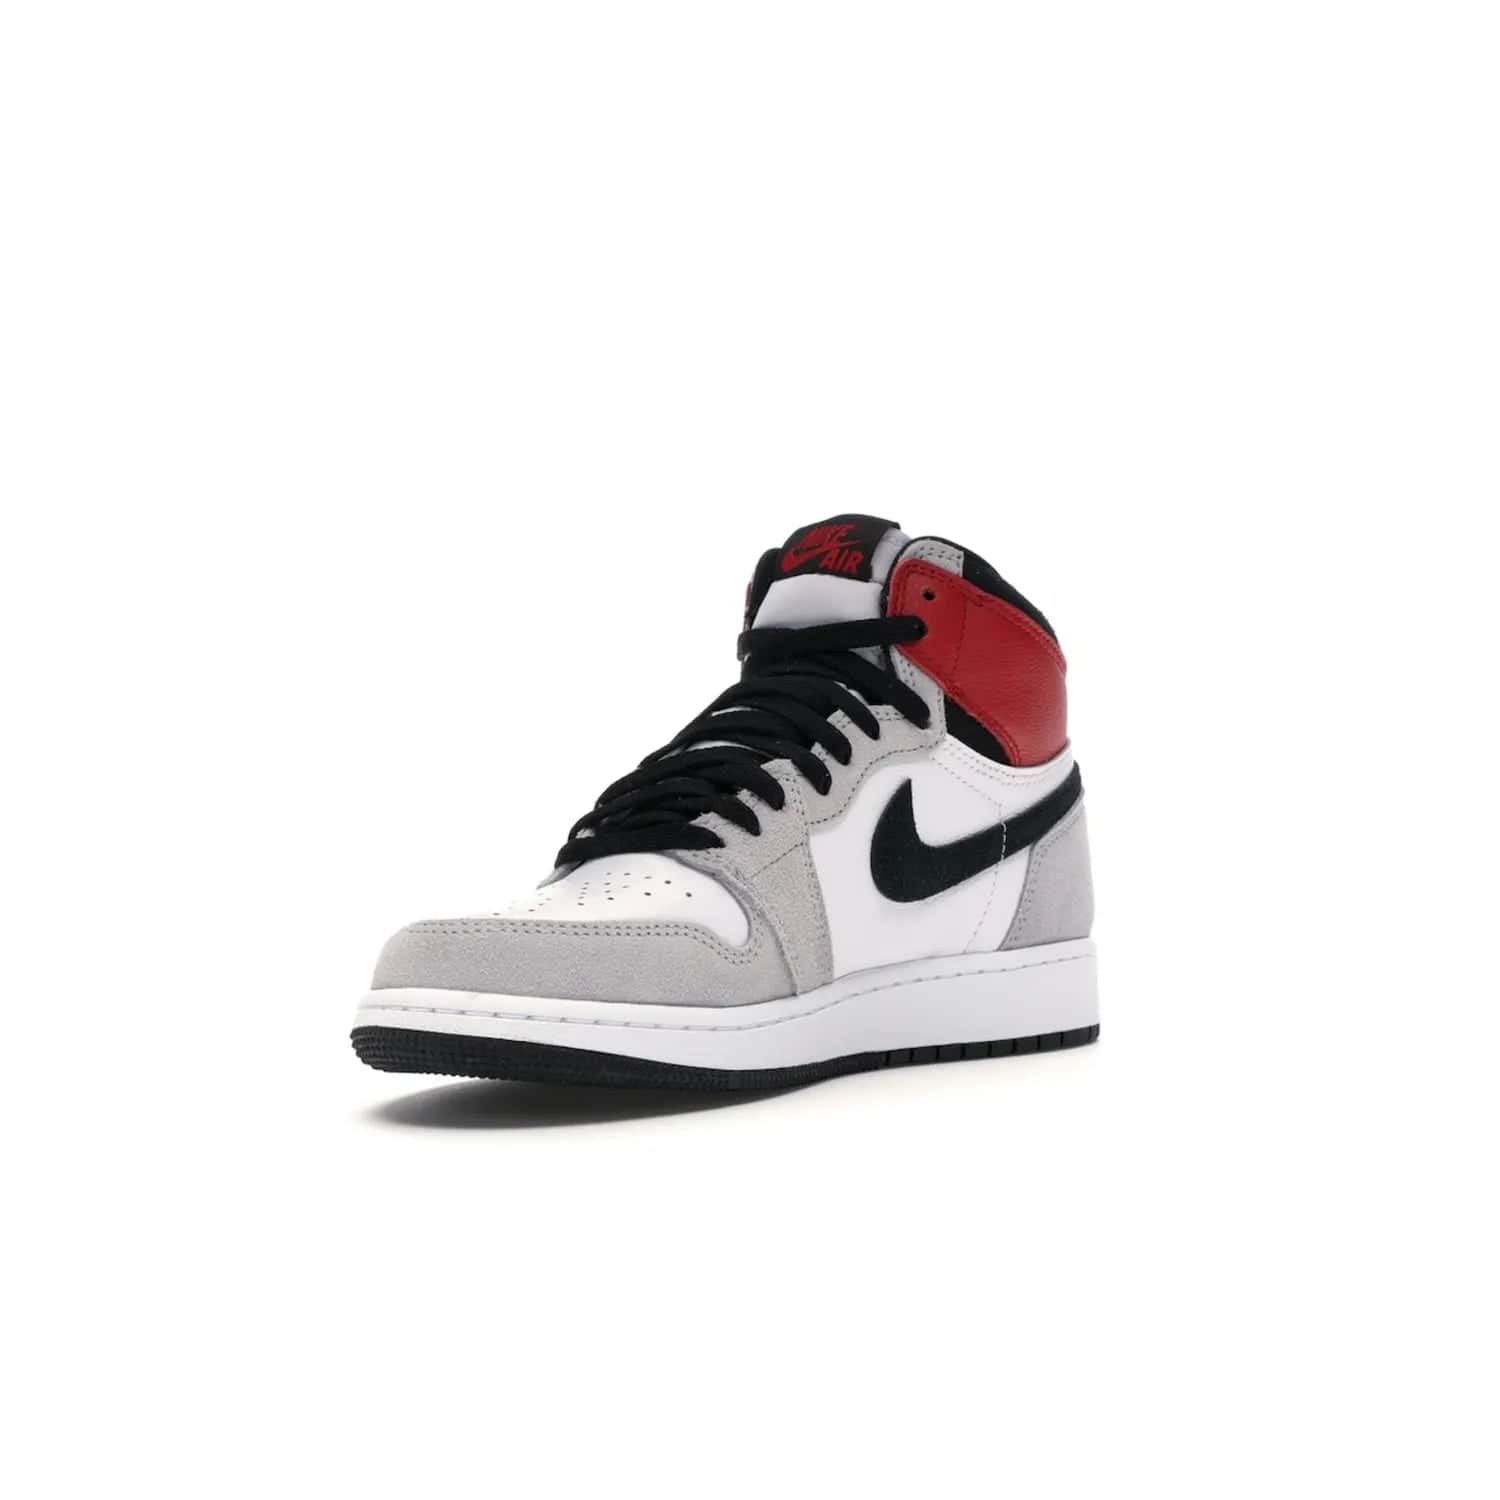 Jordan 1 Retro High Light Smoke Grey (GS) - Image 14 - Only at www.BallersClubKickz.com - Jordan 1 Retro High Light Smoke Grey (GS) features shades of grey, black, and Varsity Red with a bold silhouette. Premium white leather and suede overlays create a unique look. Released July 2020, offering style and performance. Perfect sneaker for any collector or fan.